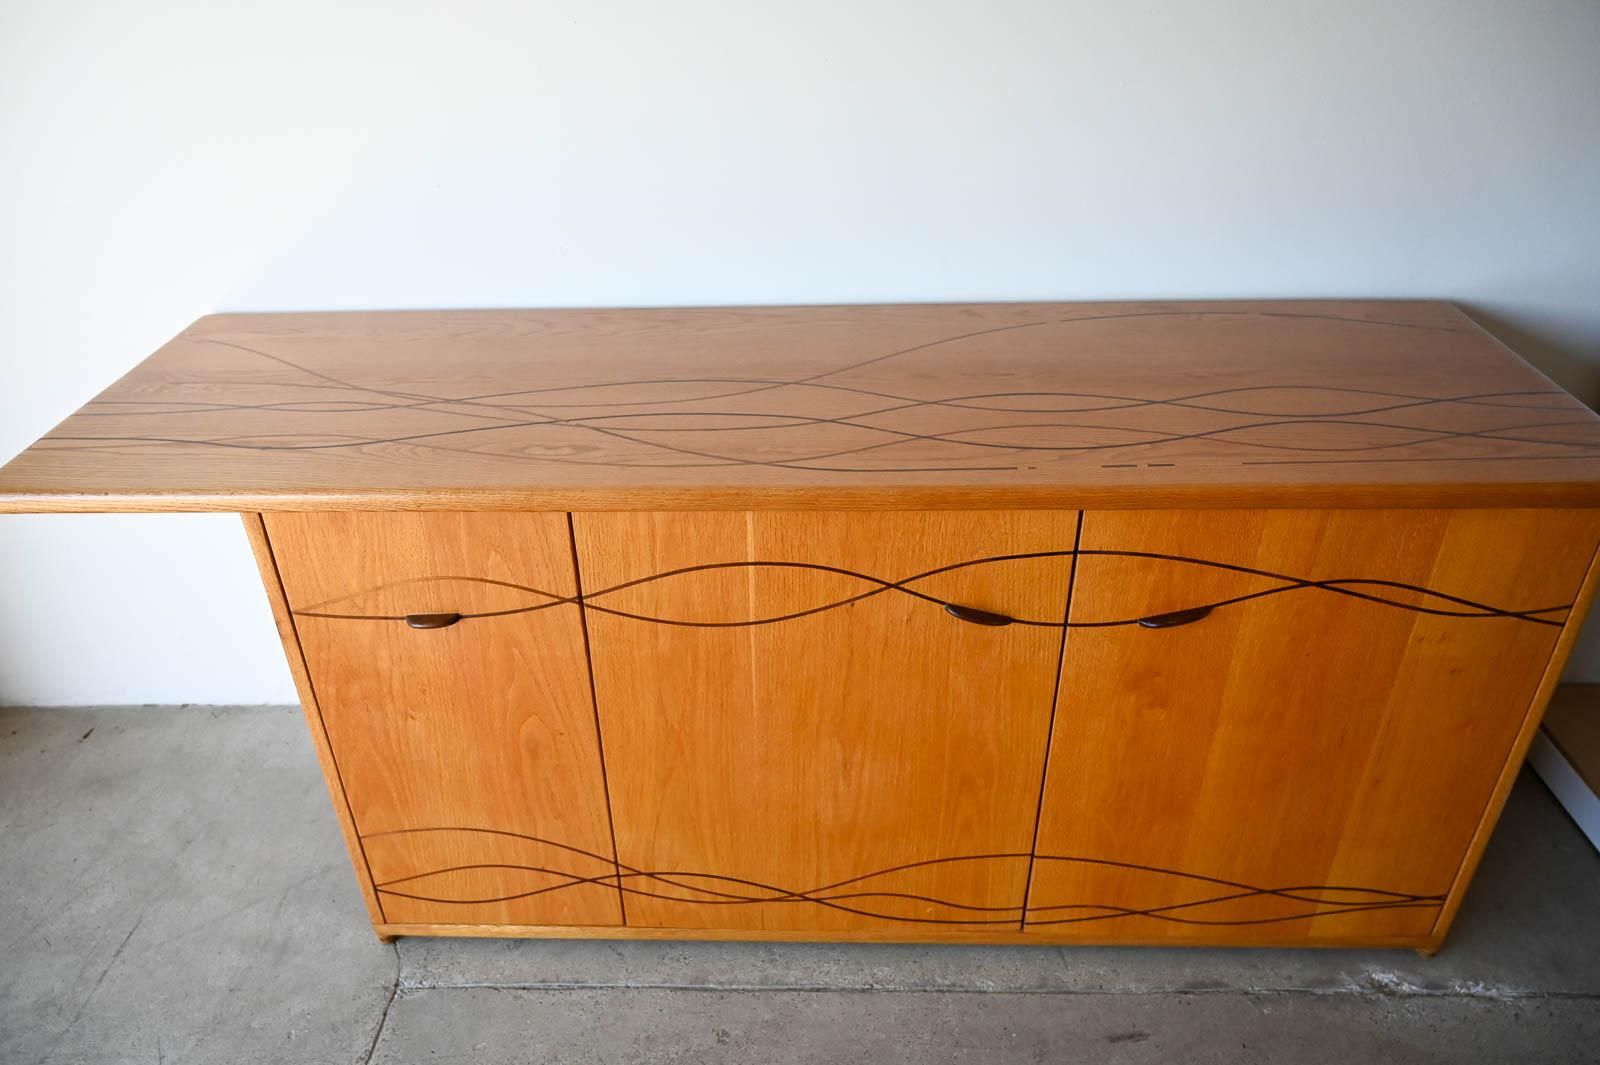 Bespoke Cabinet with Carved Inlay by Robert Squire Bierbaum, 1995 In Good Condition For Sale In Costa Mesa, CA